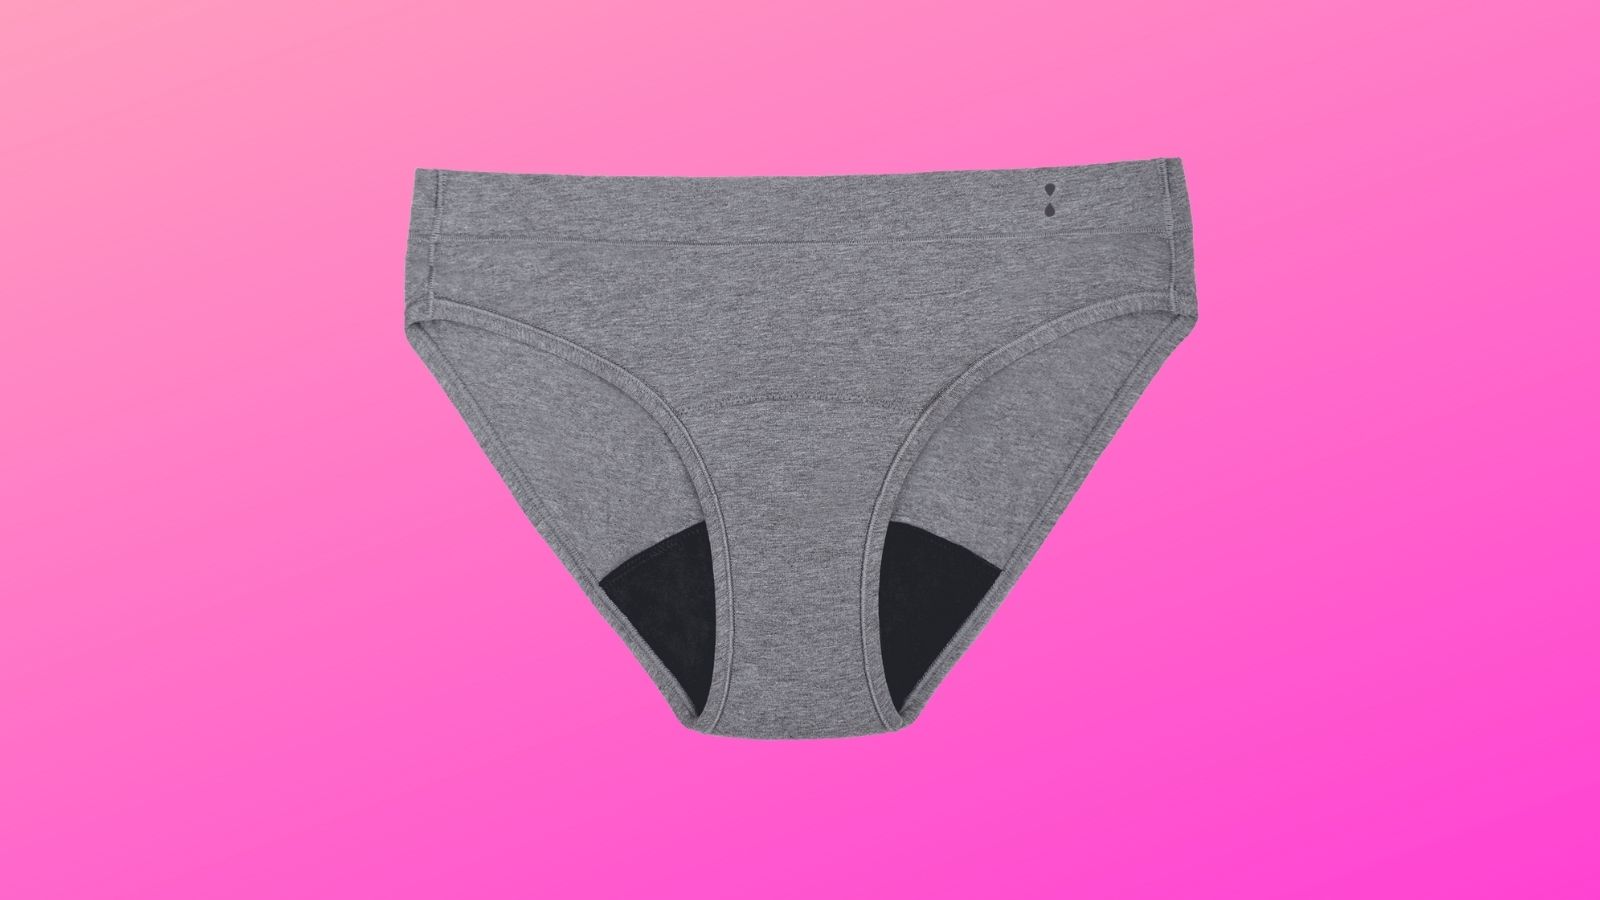 PHOTO: Designed as an entry point to the full Thinx Inc. underwear and apparel portfolio, this new collection will include, Brief, Bikini, and Hi-Waist styles.